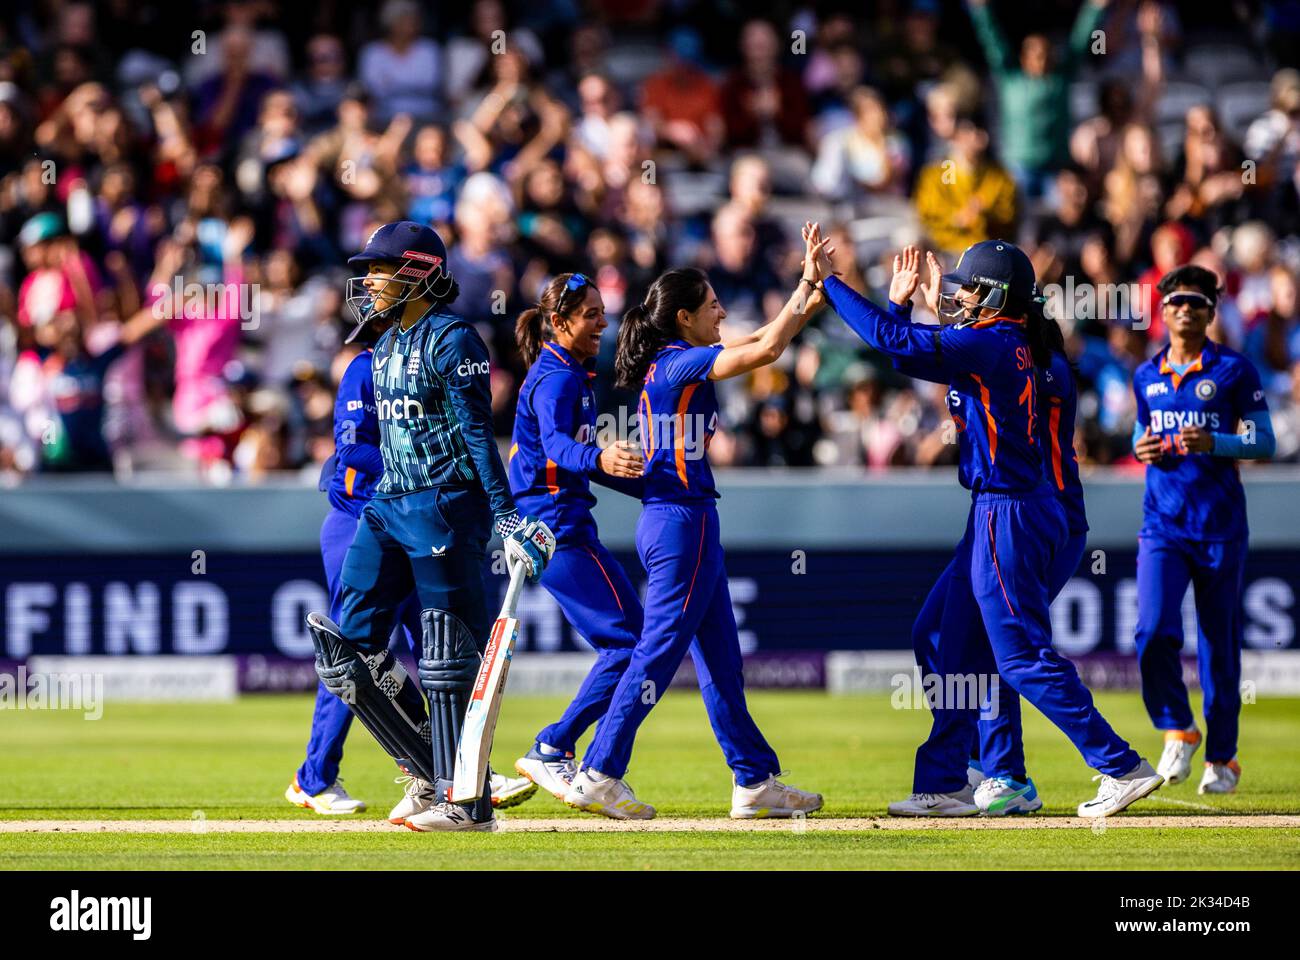 England's Sophia Dunkley is bowled out by India’s Renuka Thakur during the third women's one day international match at Lord's, London. Picture date: Saturday September 24, 2022. Stock Photo